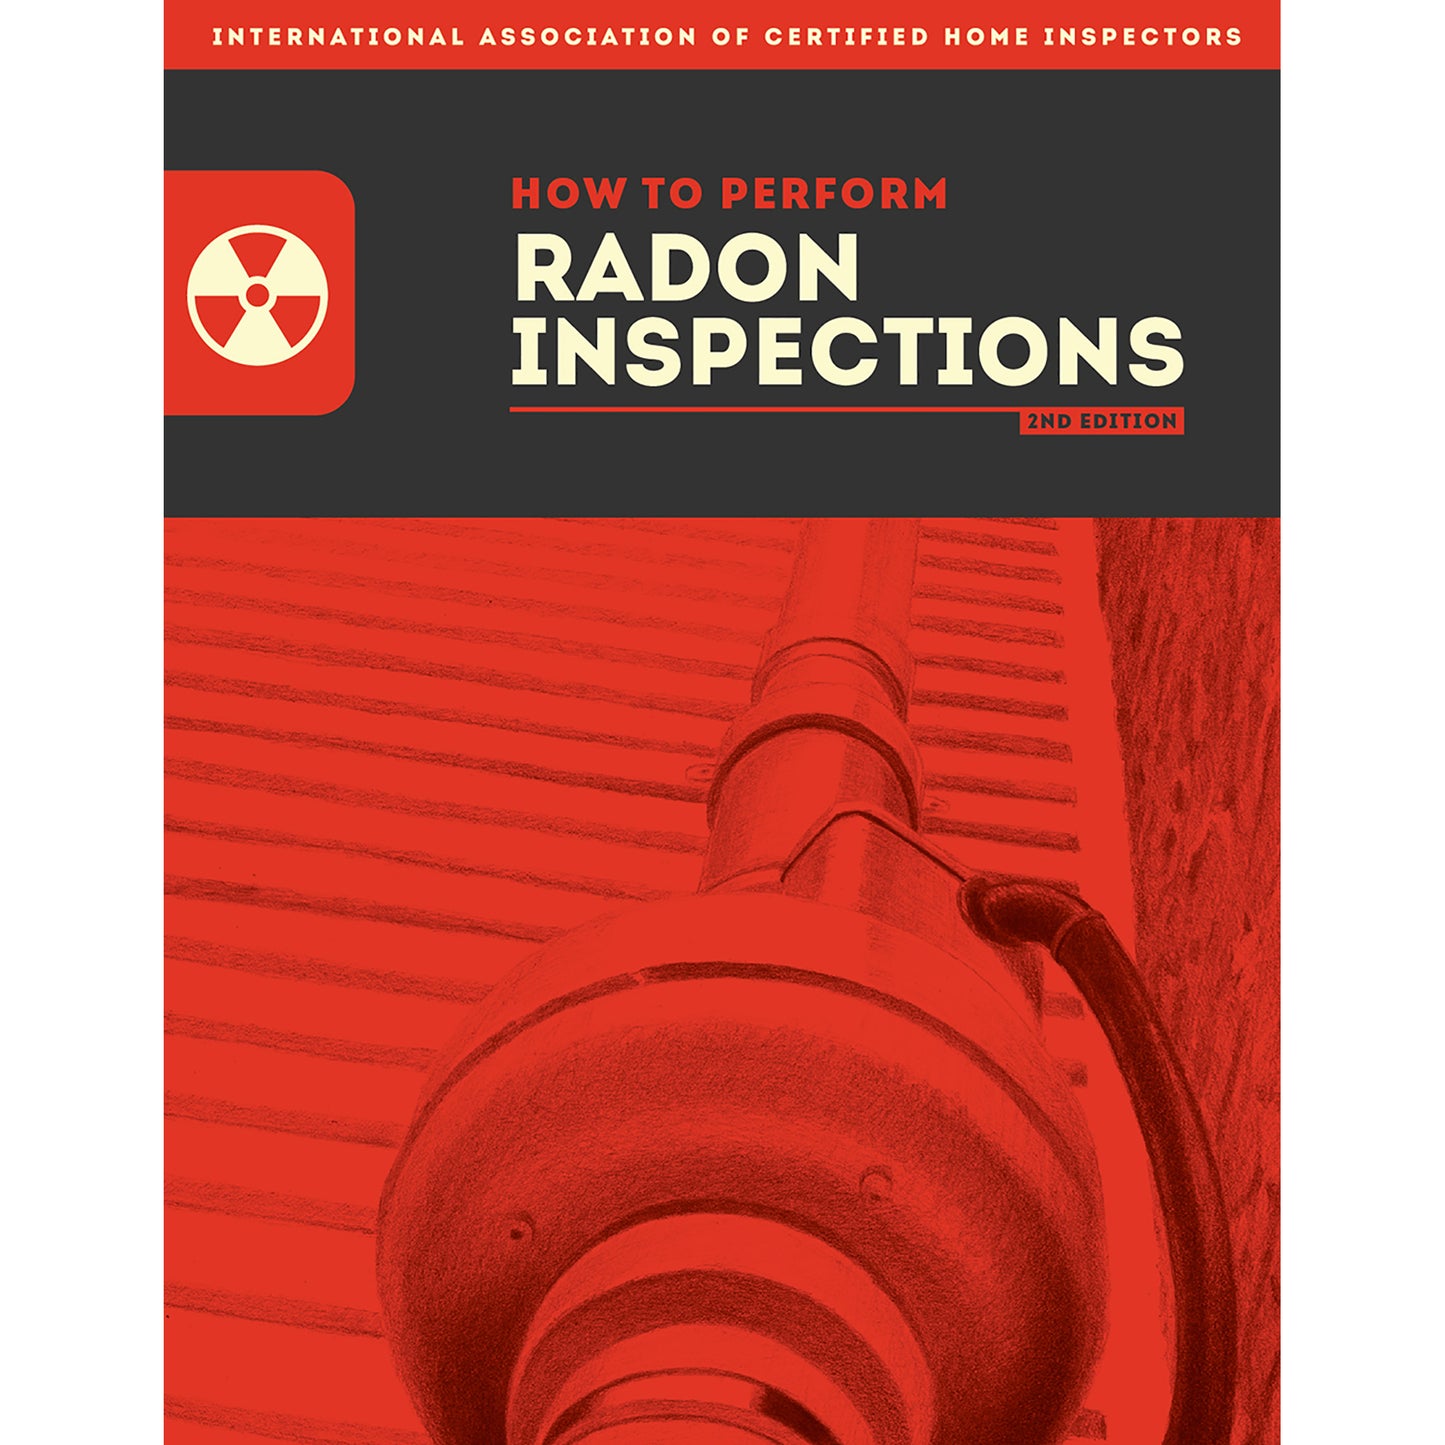 How to Perform Radon Inspections PDF Download